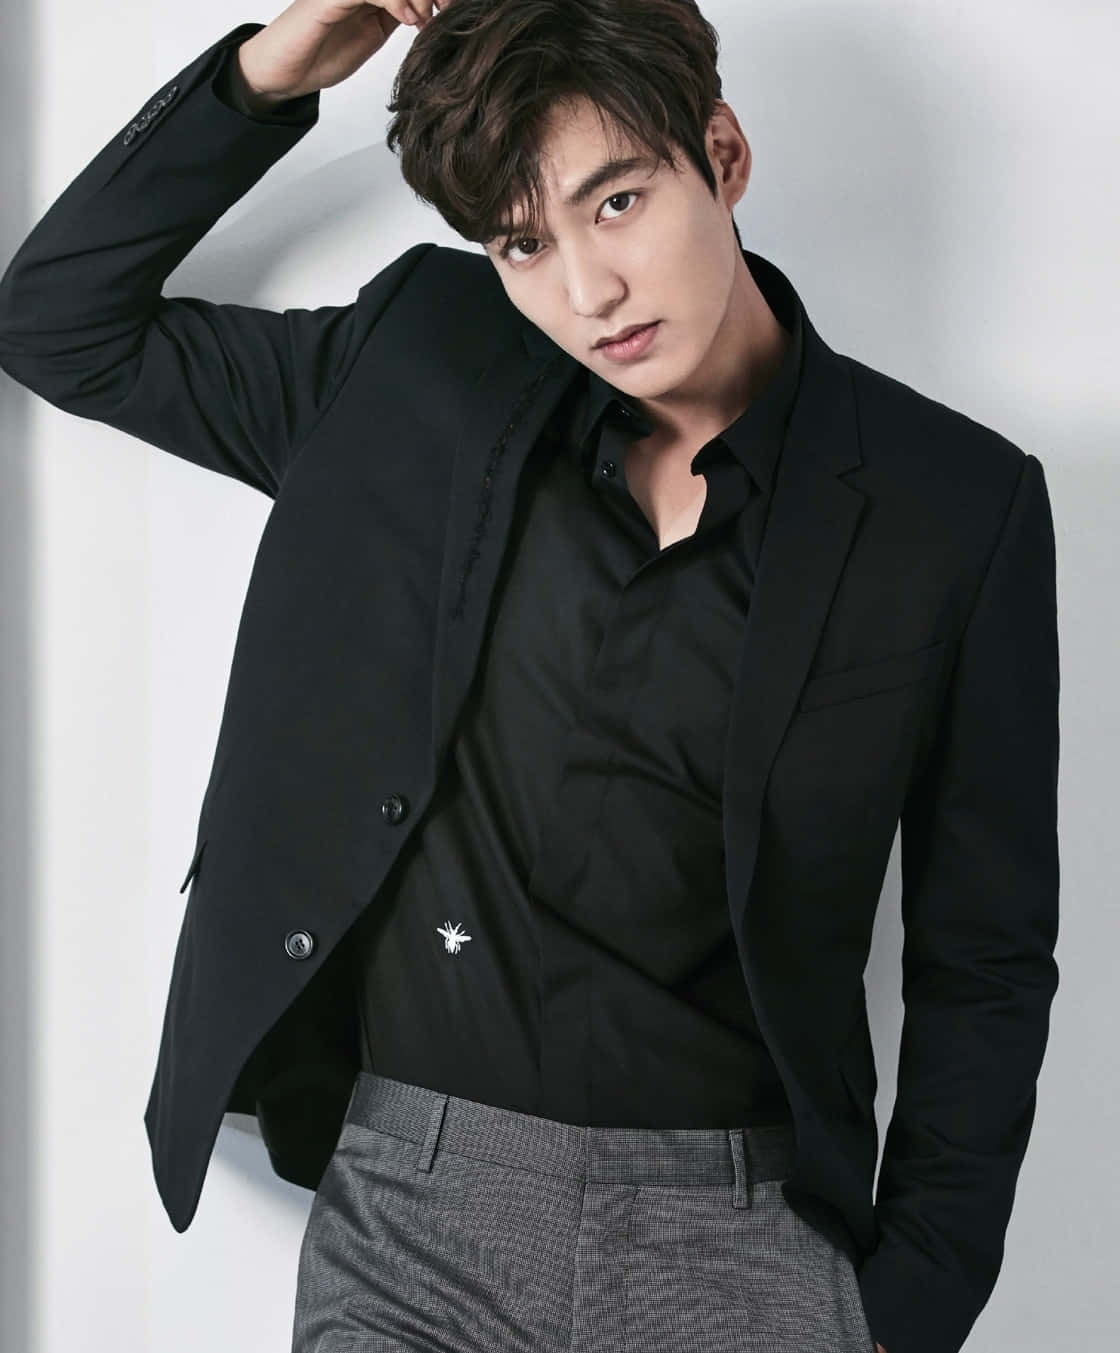 The Dashing Appeal - A breathtaking shoot of the charming Korean actor Lee Min Ho.